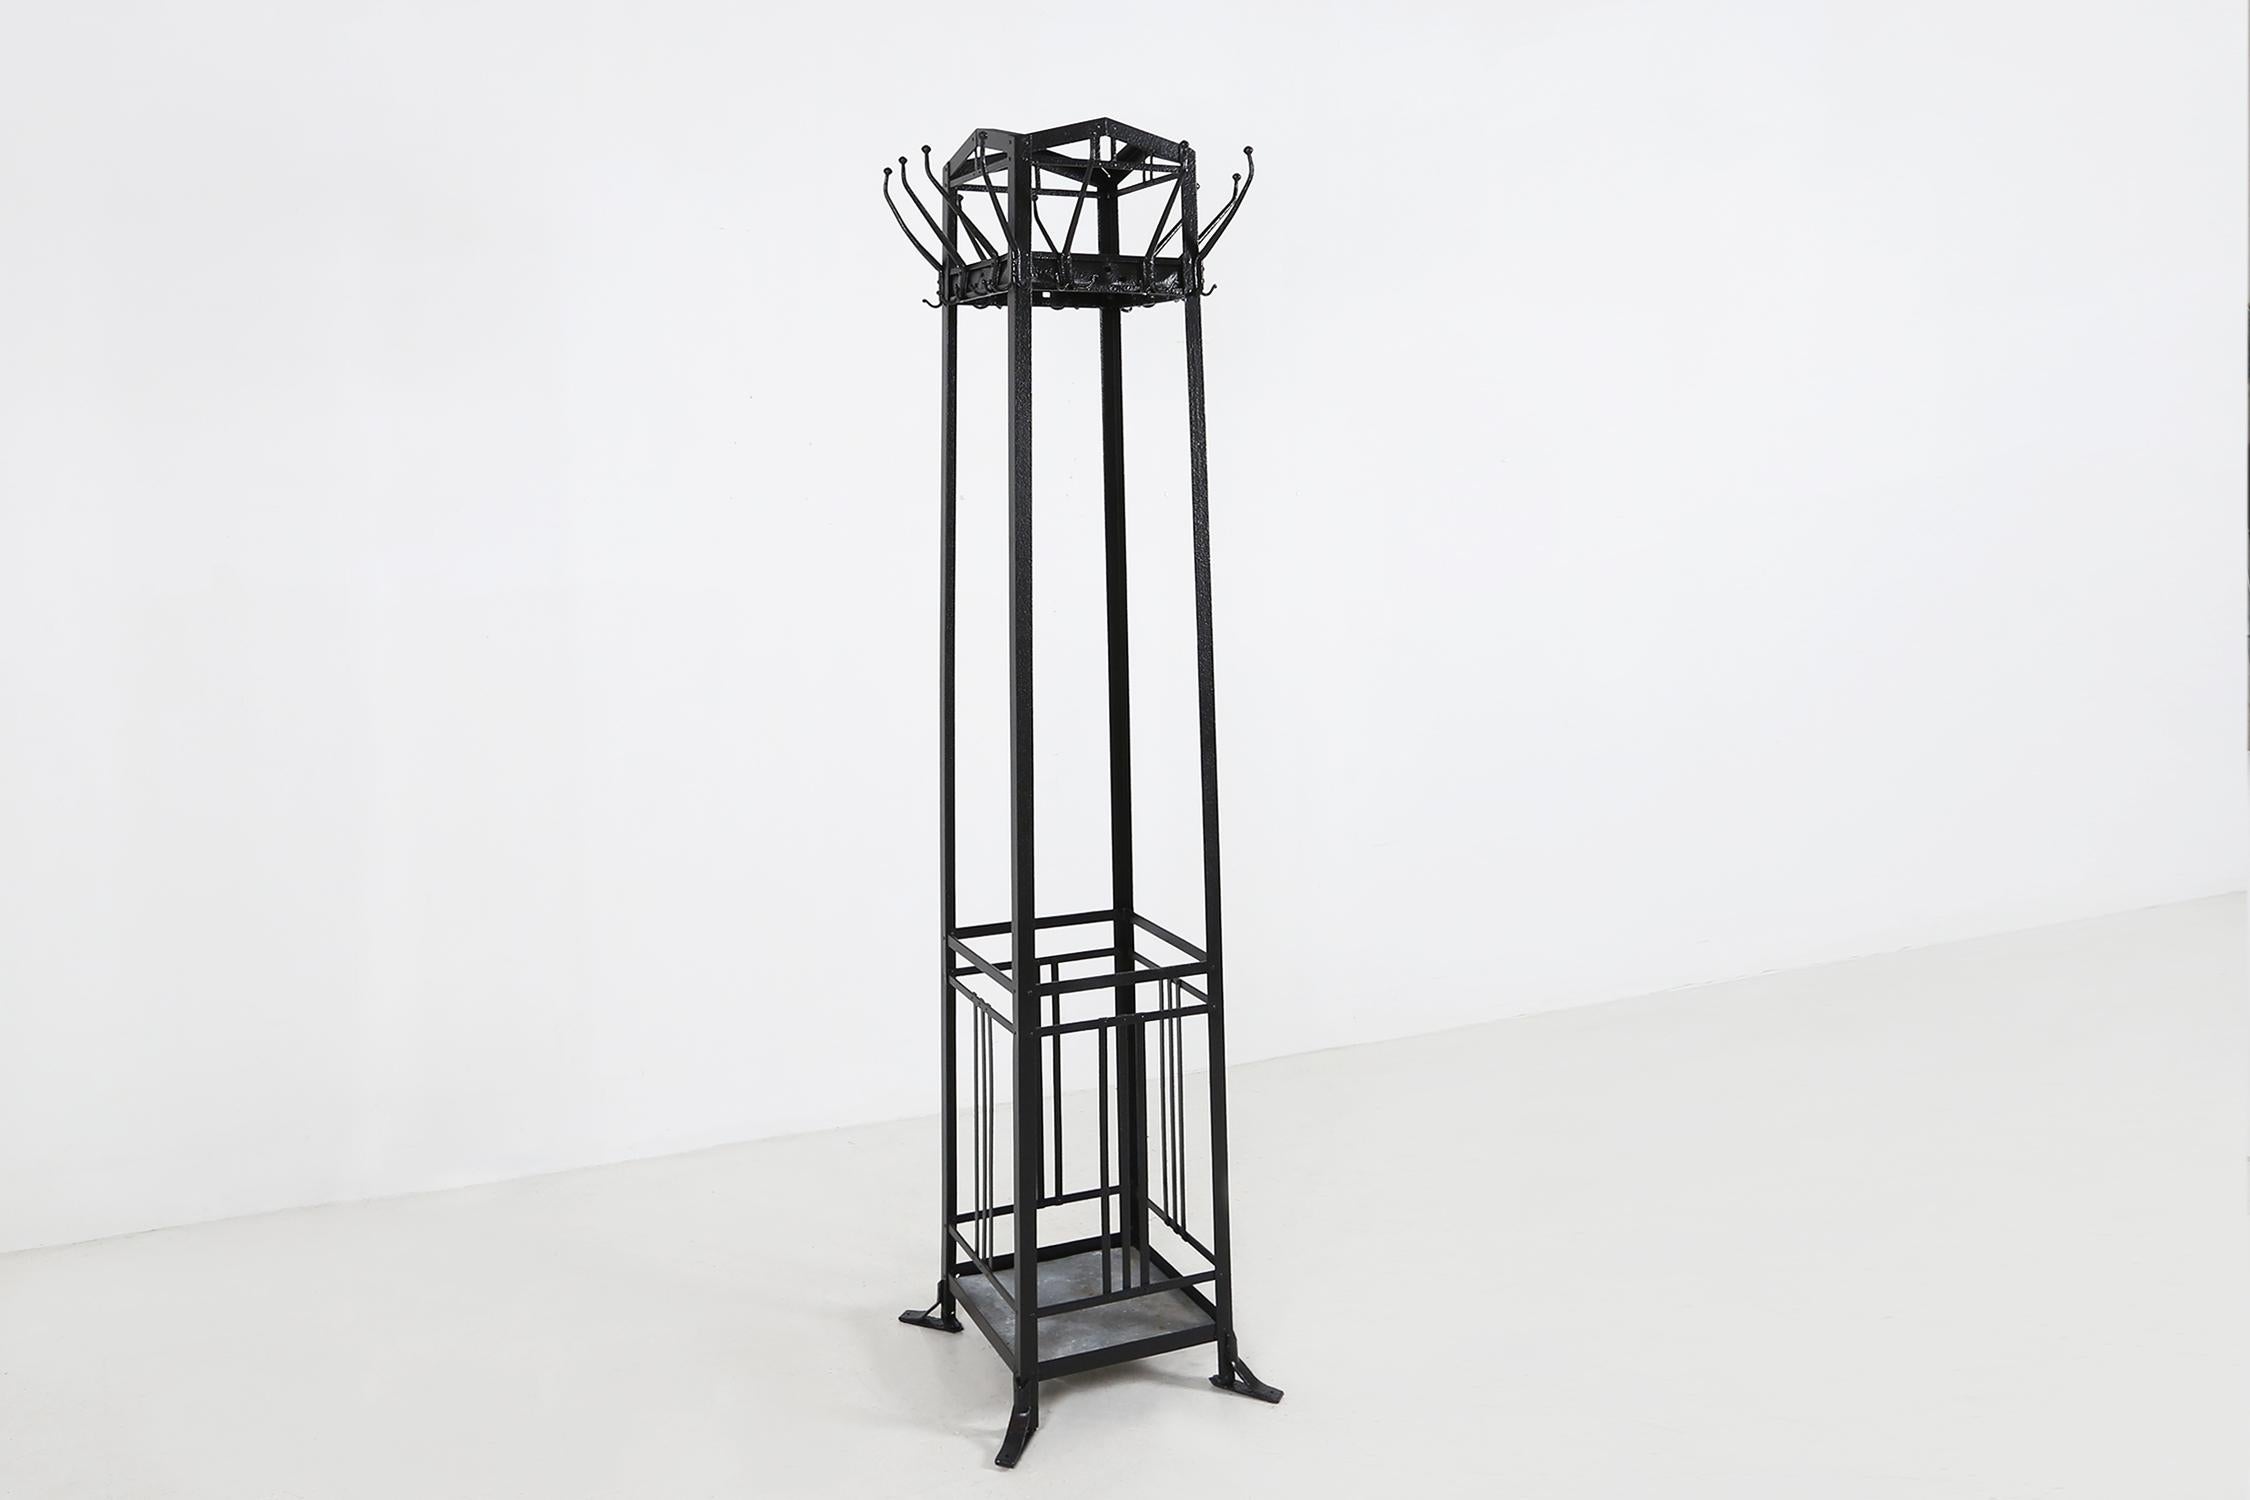 Early 20th Century Coat Rack in the Manner of Belgian Art Deco Designer Gustave Serrurier-Bovy For Sale